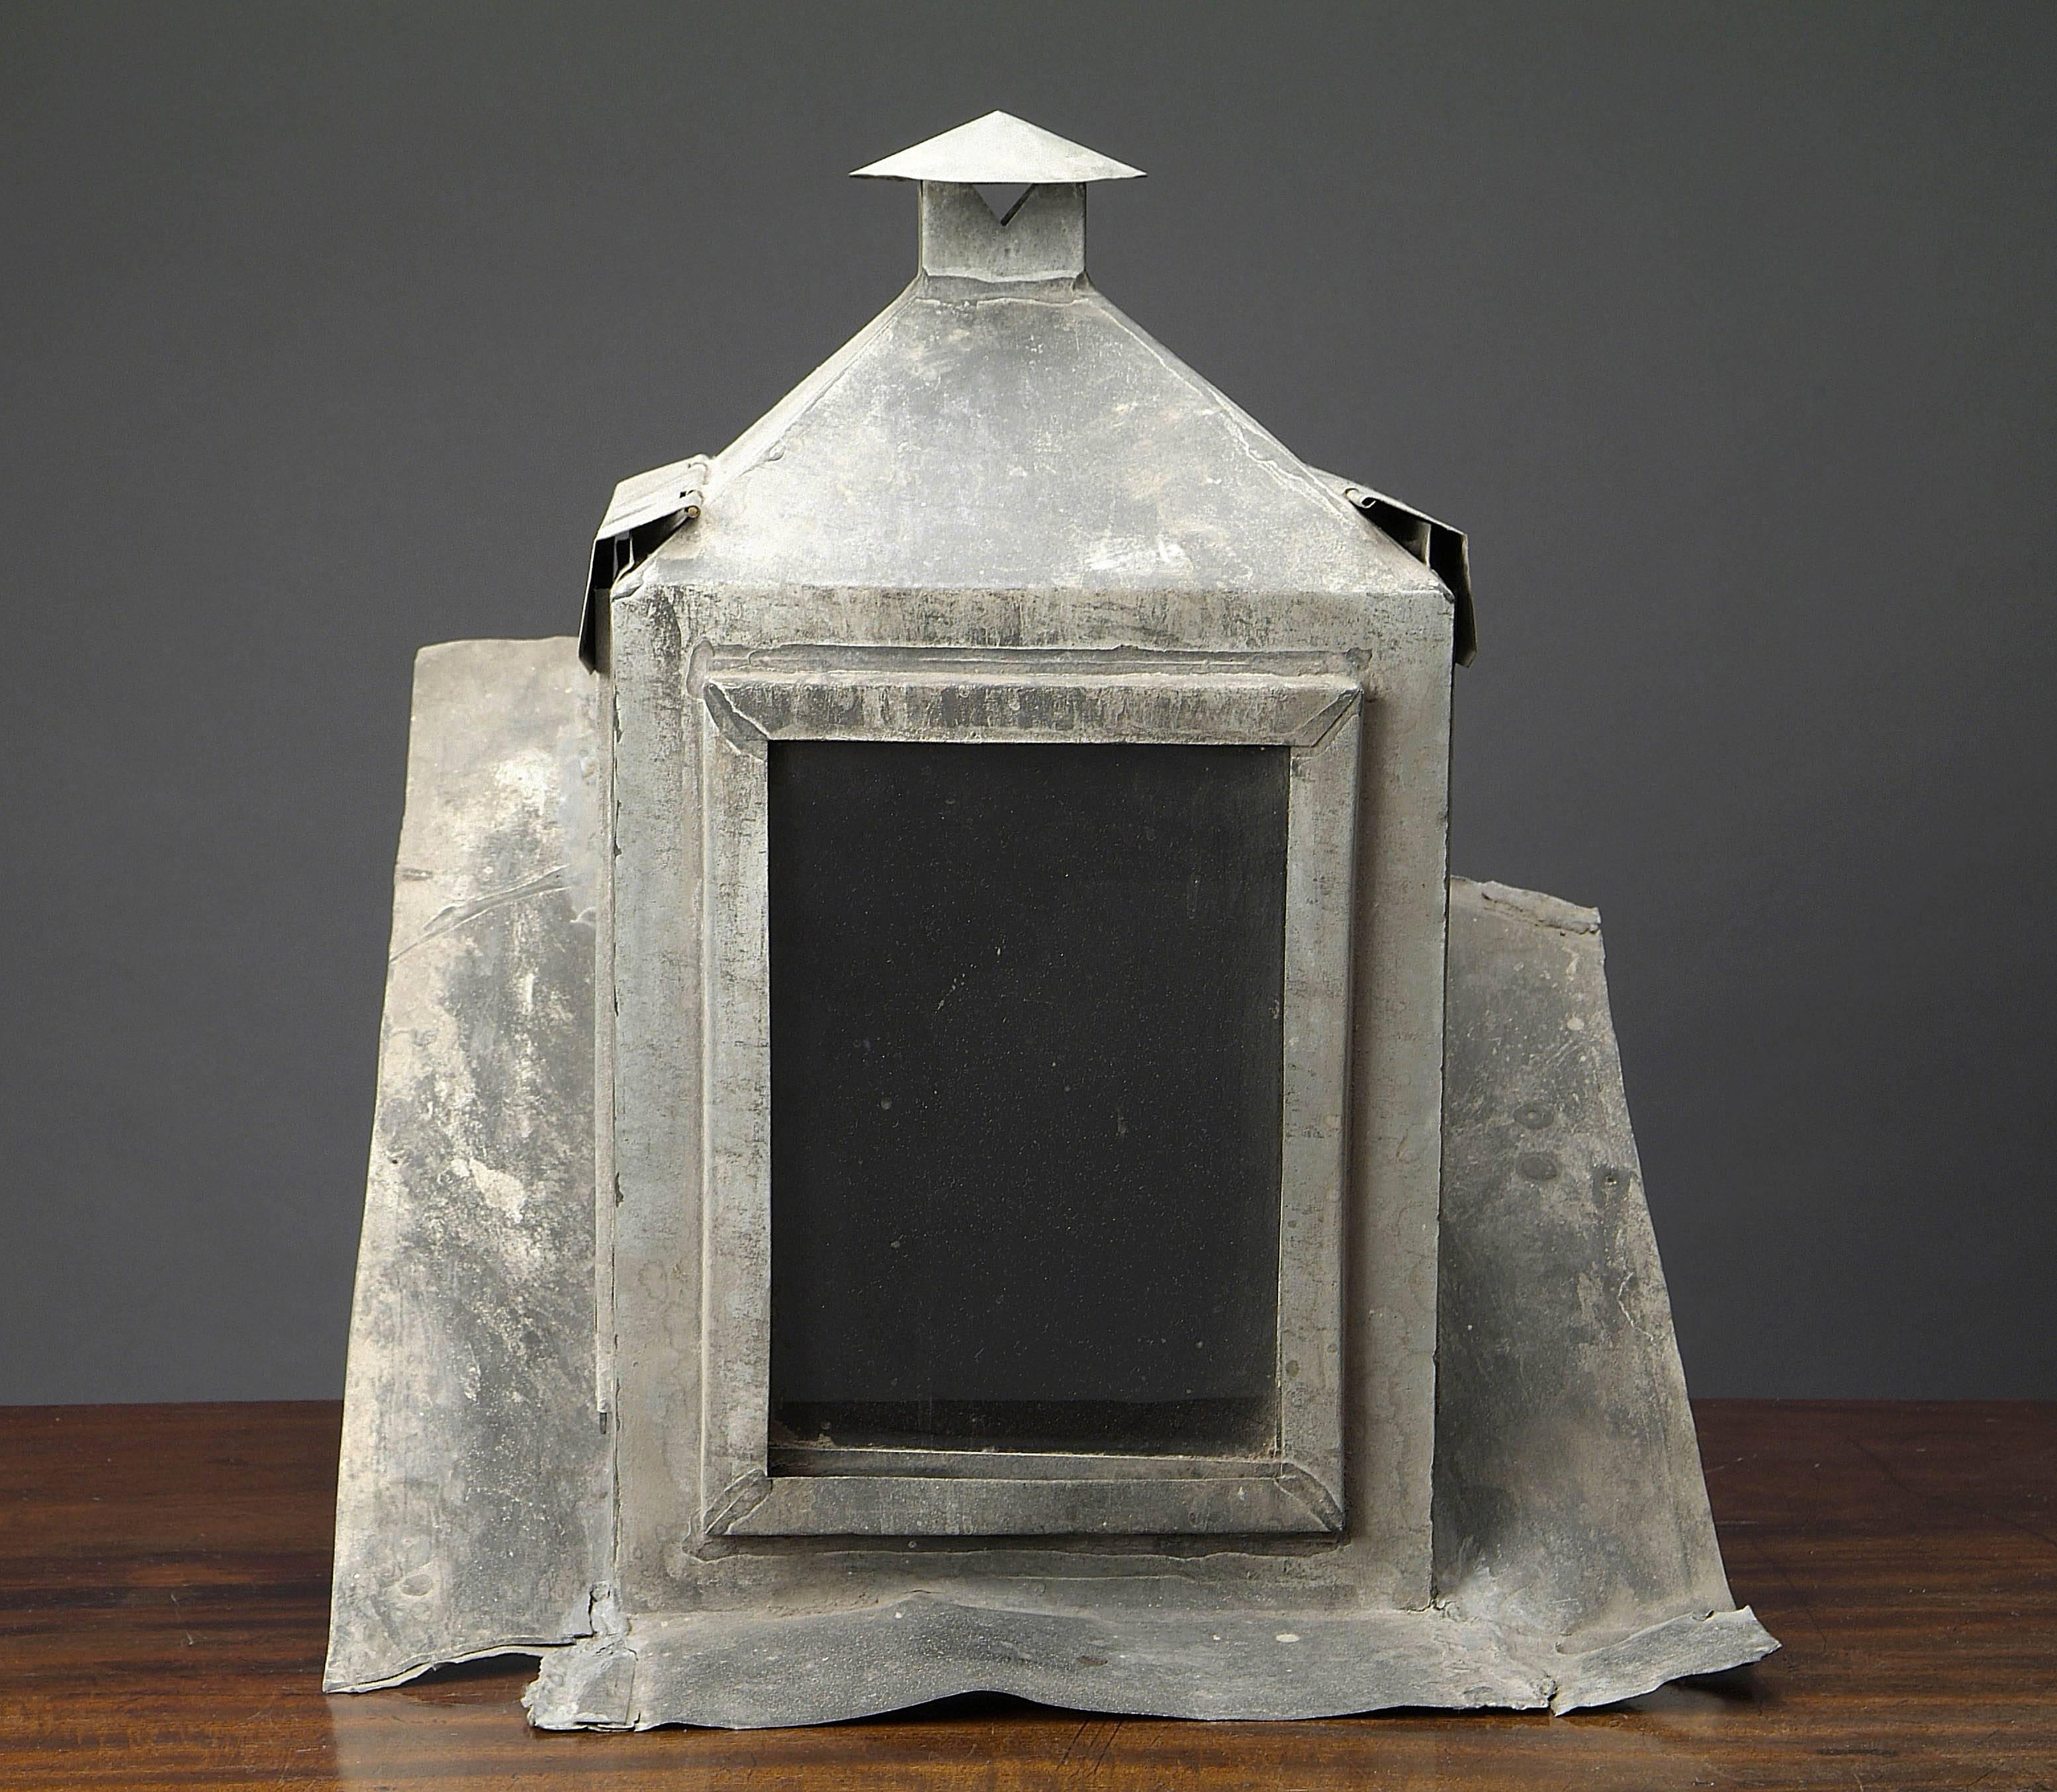 A rare skylight of a pigeon fancier in zinc, was used to observe the flight and return of the pigeons, France, 19th century
Dimensions: 50 x 65 x H 55.